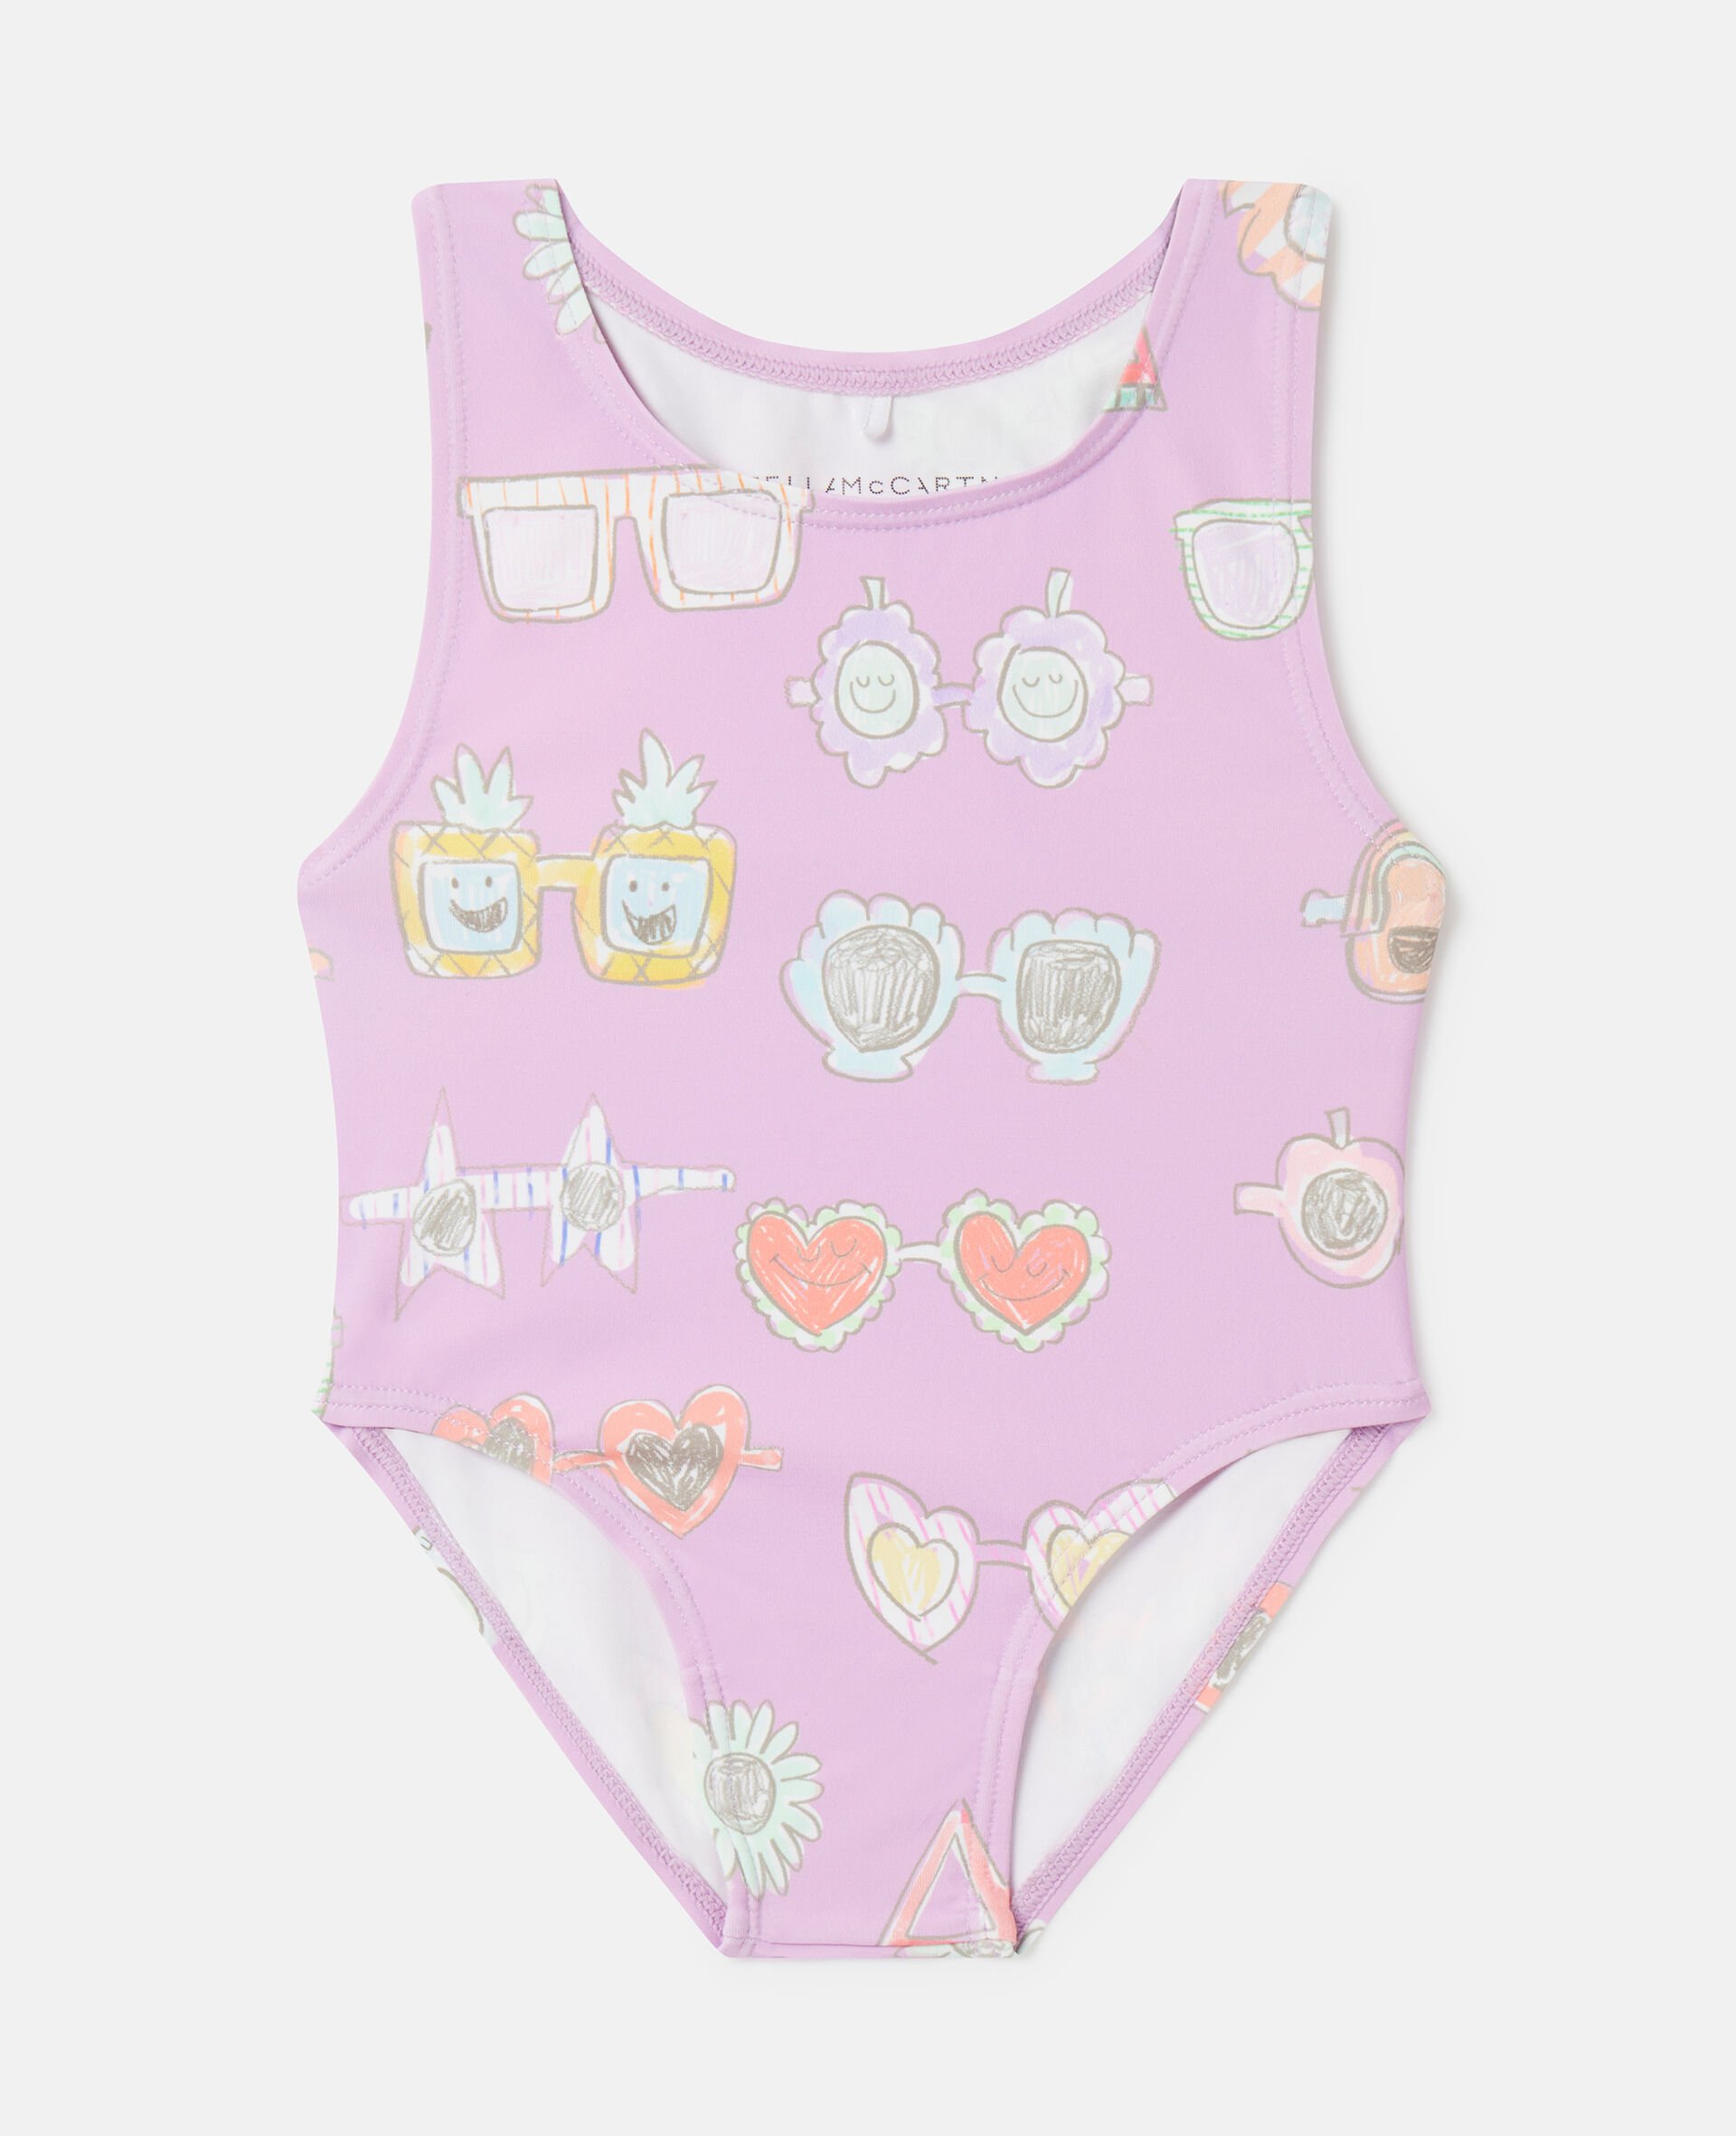 Sunglasses Doodle Print Swimsuit-粉色-large image number 0